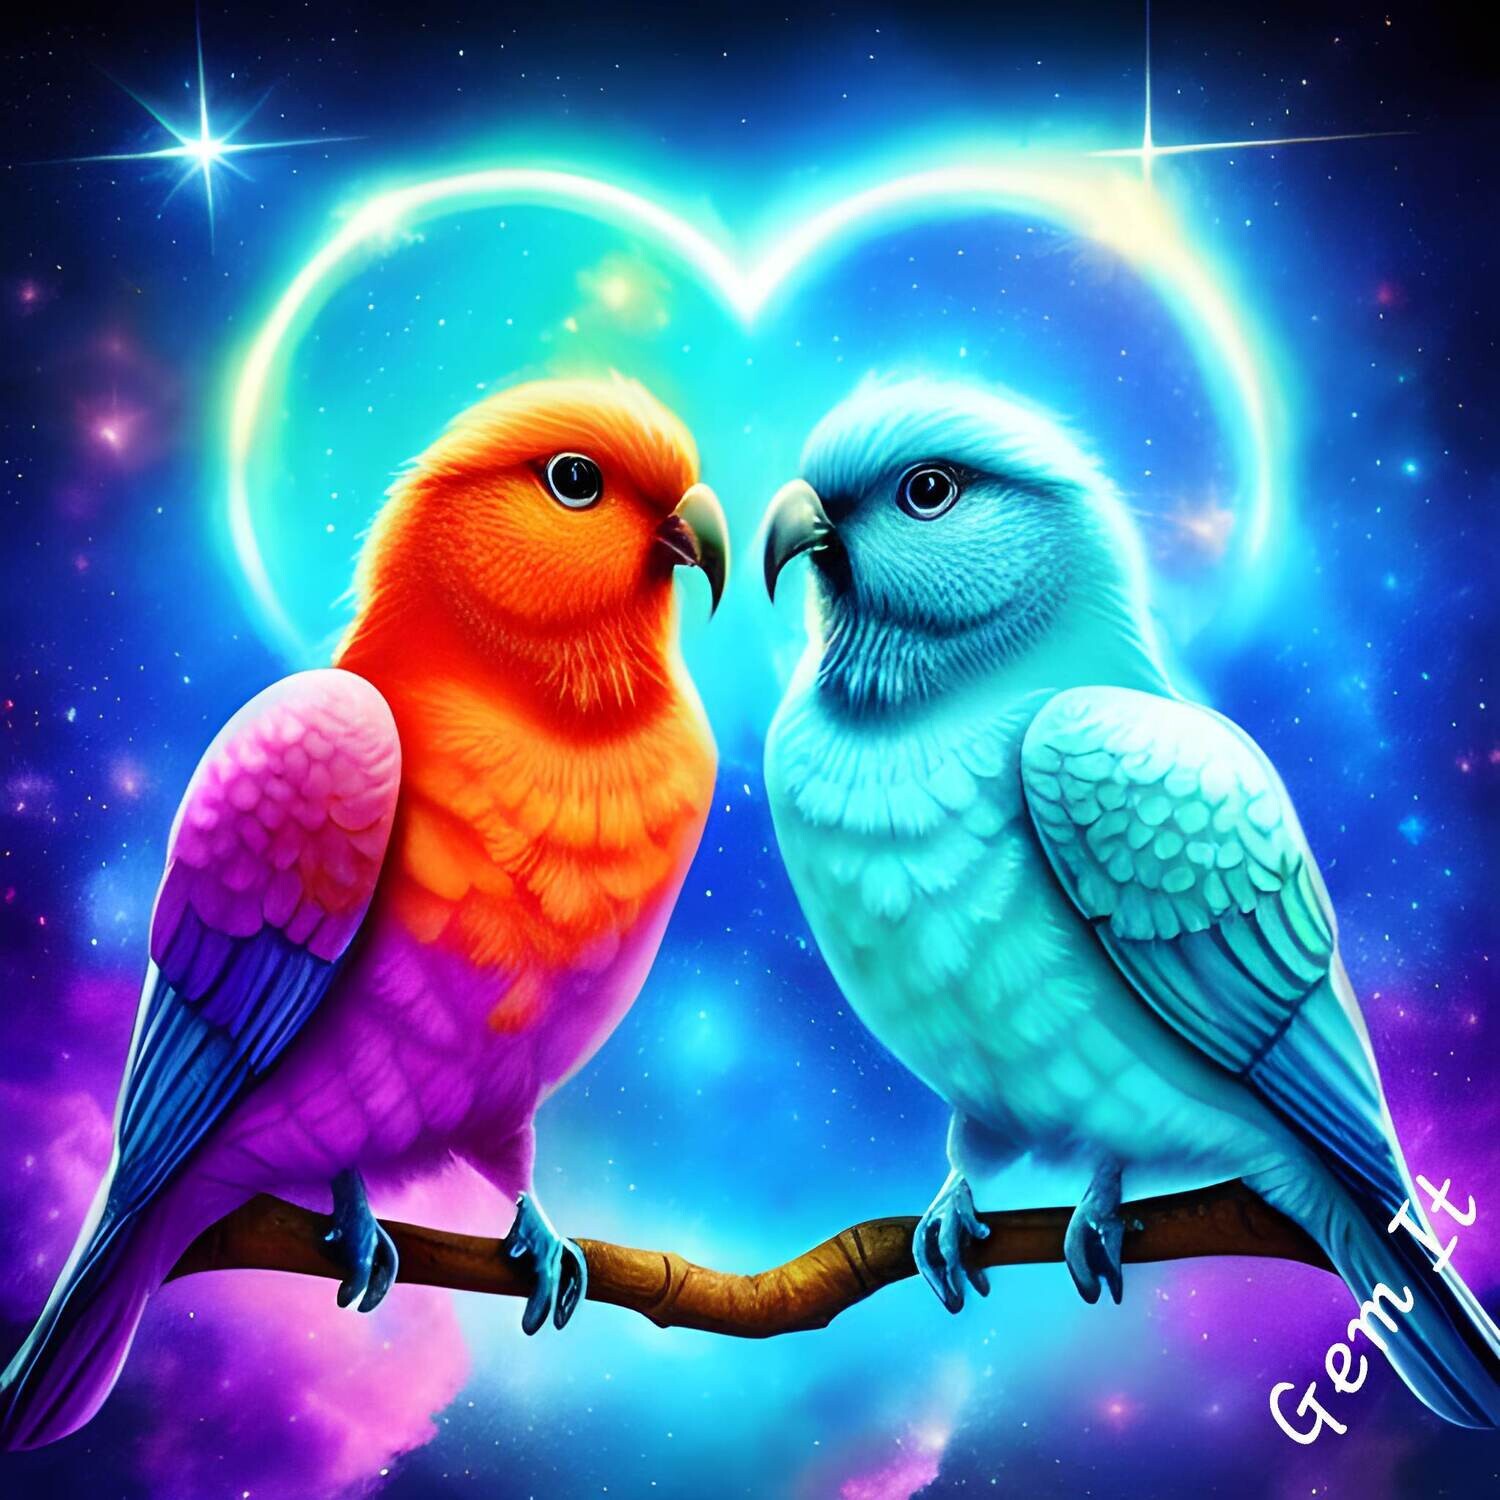 Love Birds 261 - Full Drill Diamond Painting - Specially ordered for you. Delivery is approximately 4 - 6 weeks.